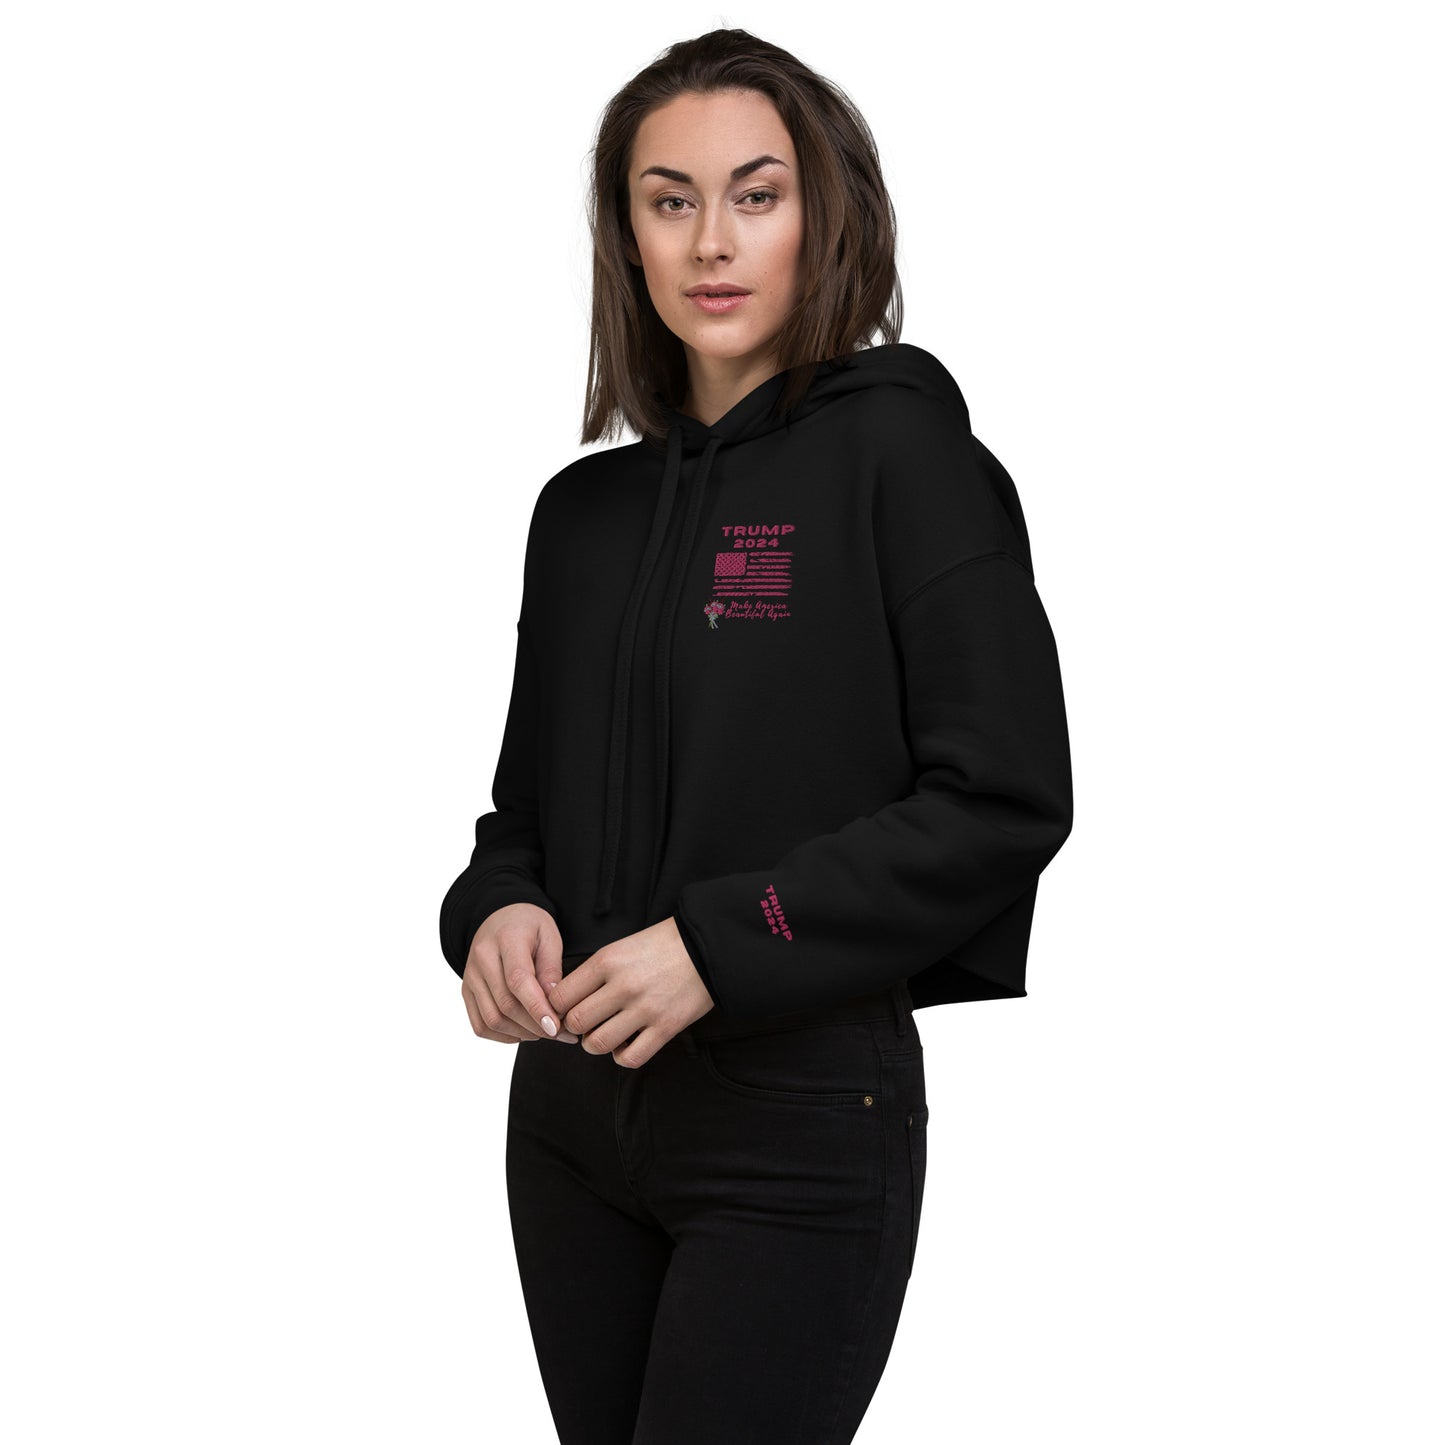 Trump 2024 Front Embroidered Pink Logo and Pink Sleeve Crop Hoodie